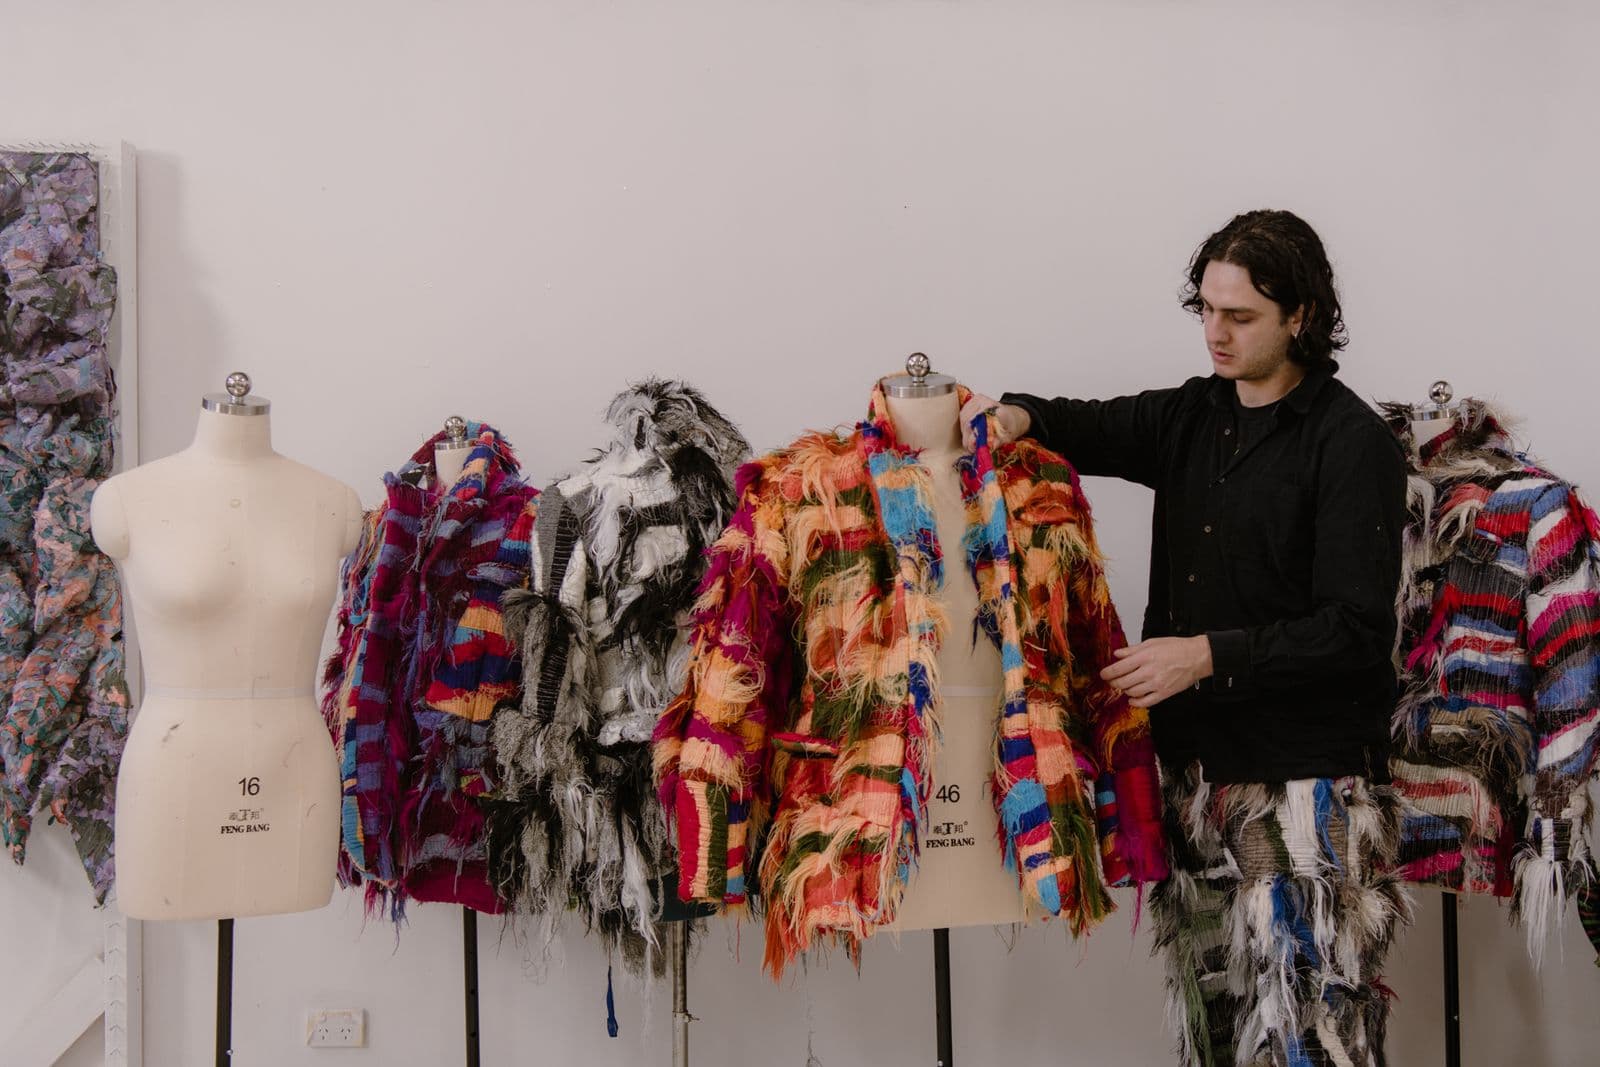 A young person stands in their studio surrounded by colourful items of clothing they have made